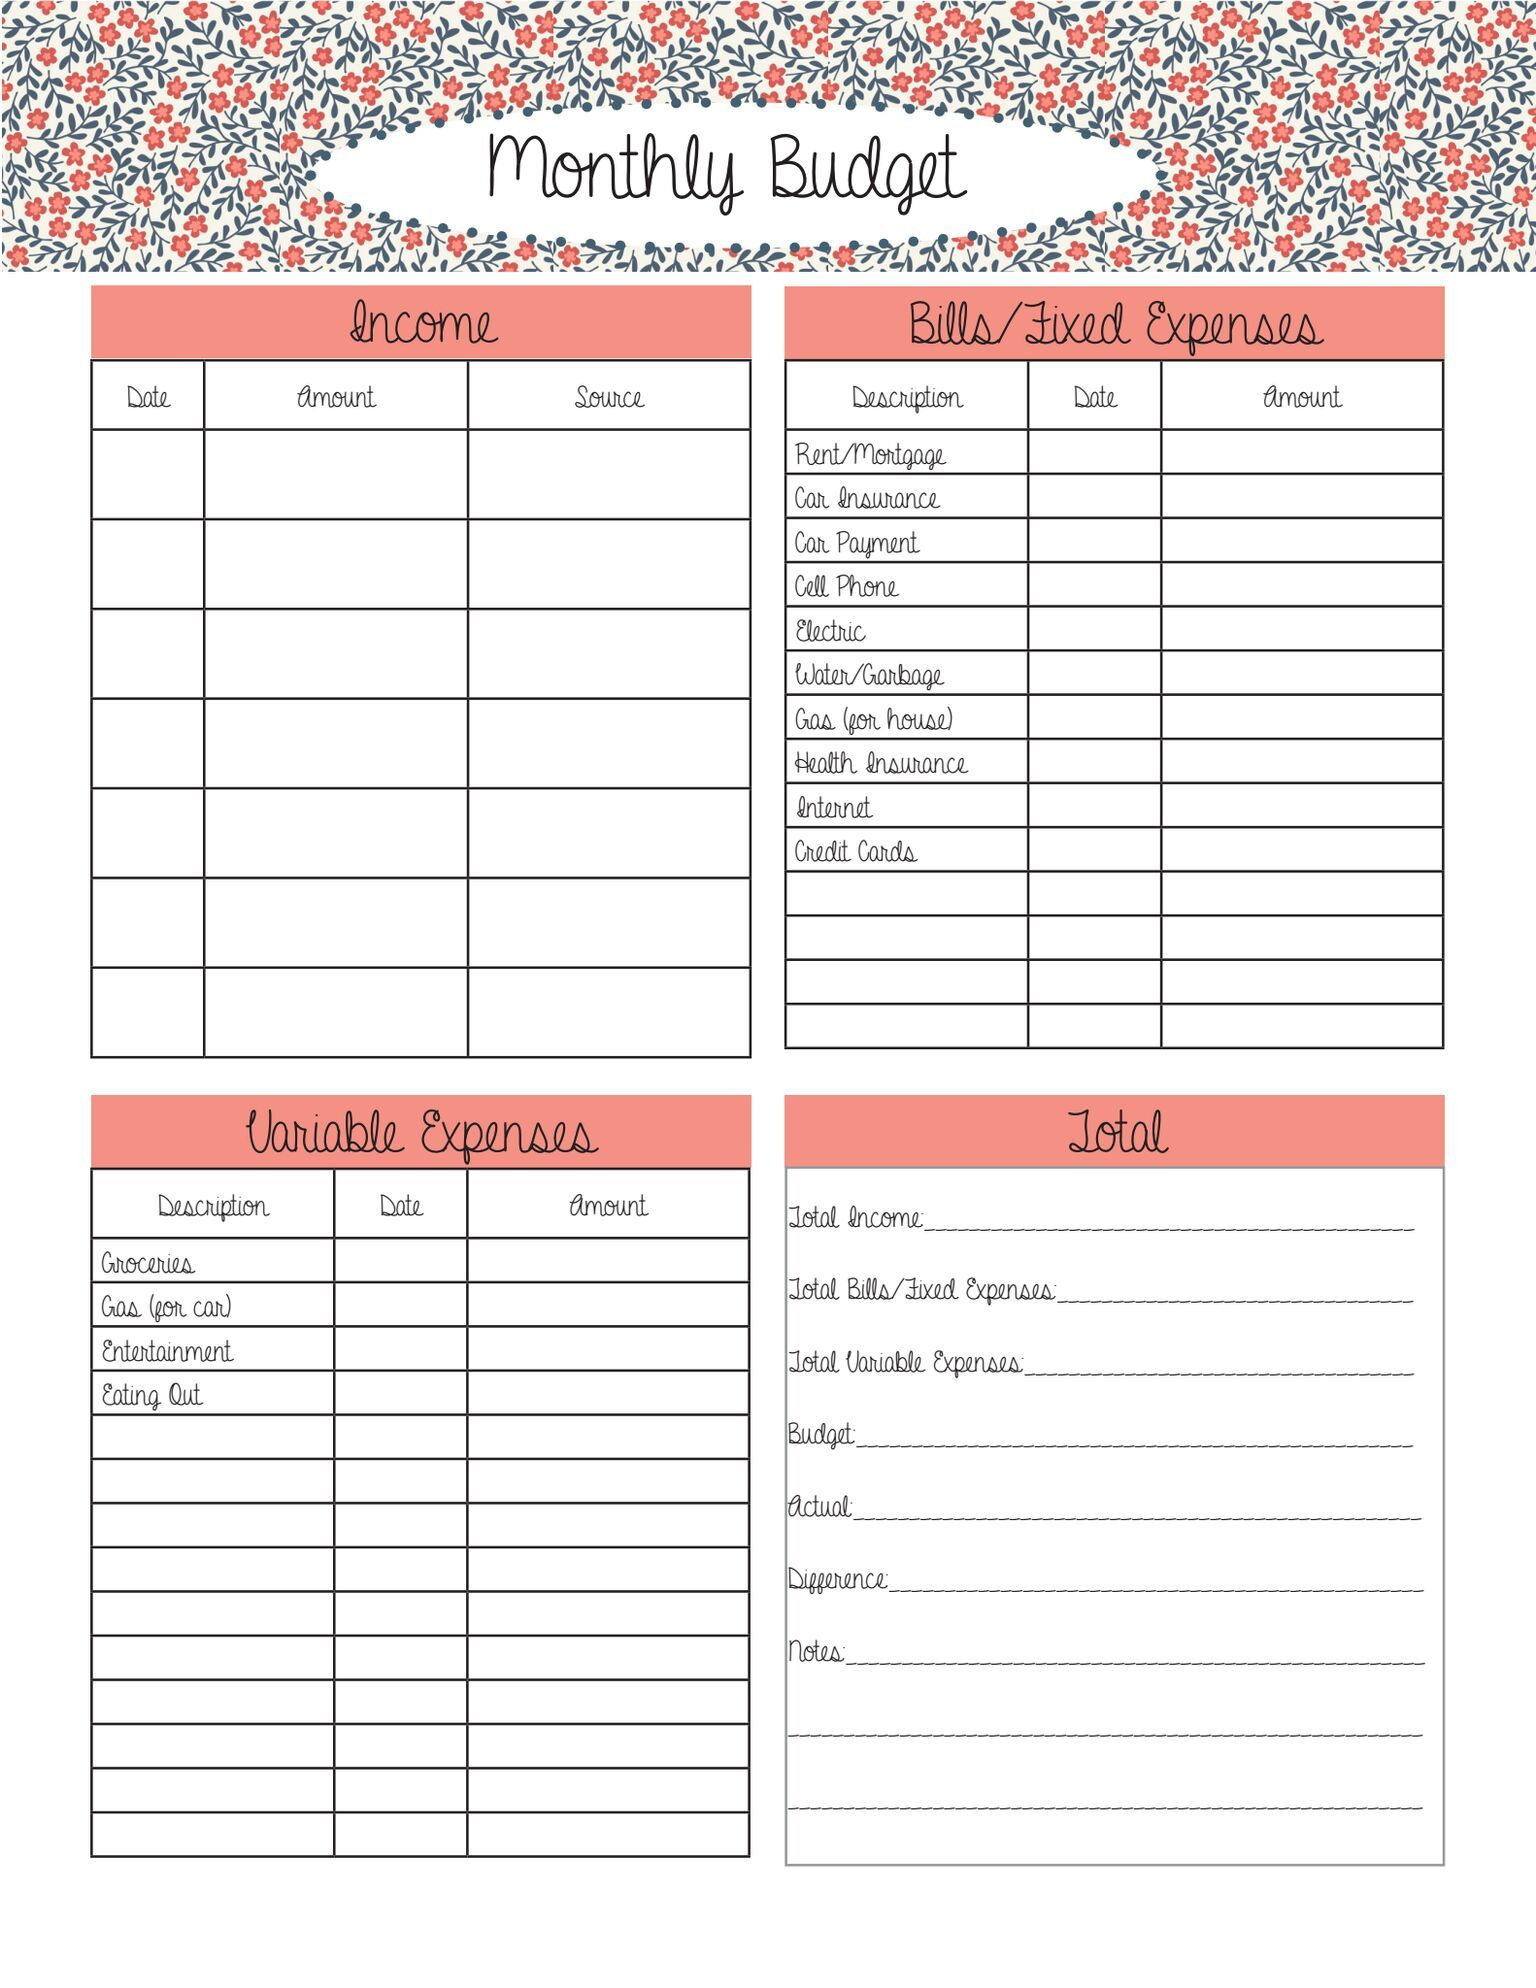 MonthlyBudget pdf Monthly Budget Printable Budget Planner Template 